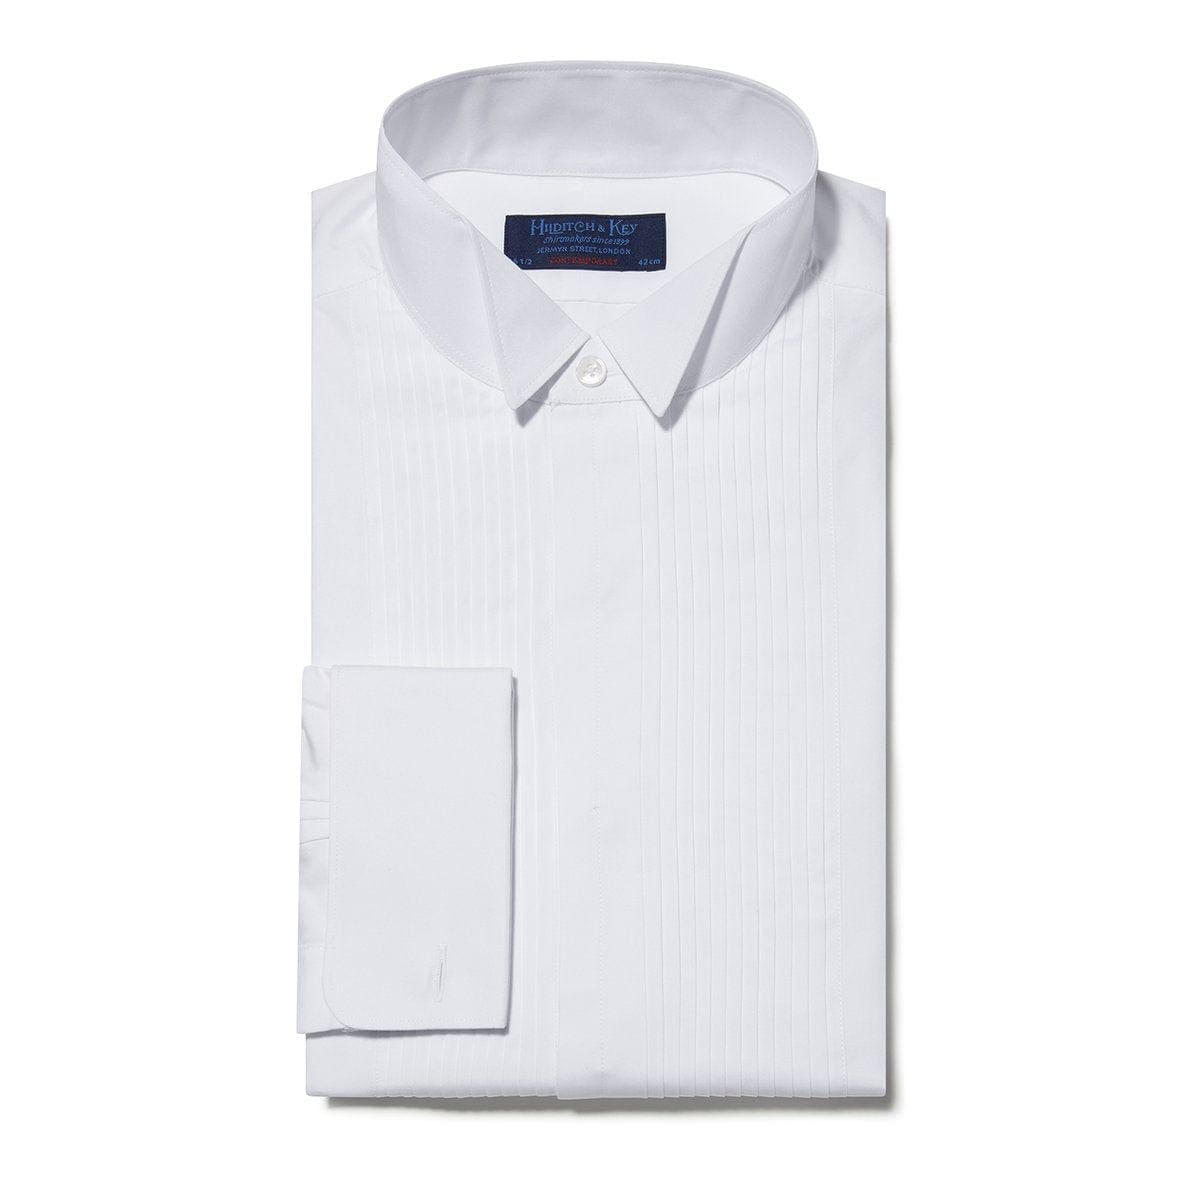 Contemporary Fit, Wing Collar, Double Cuff Dress Shirt With Pleated Front